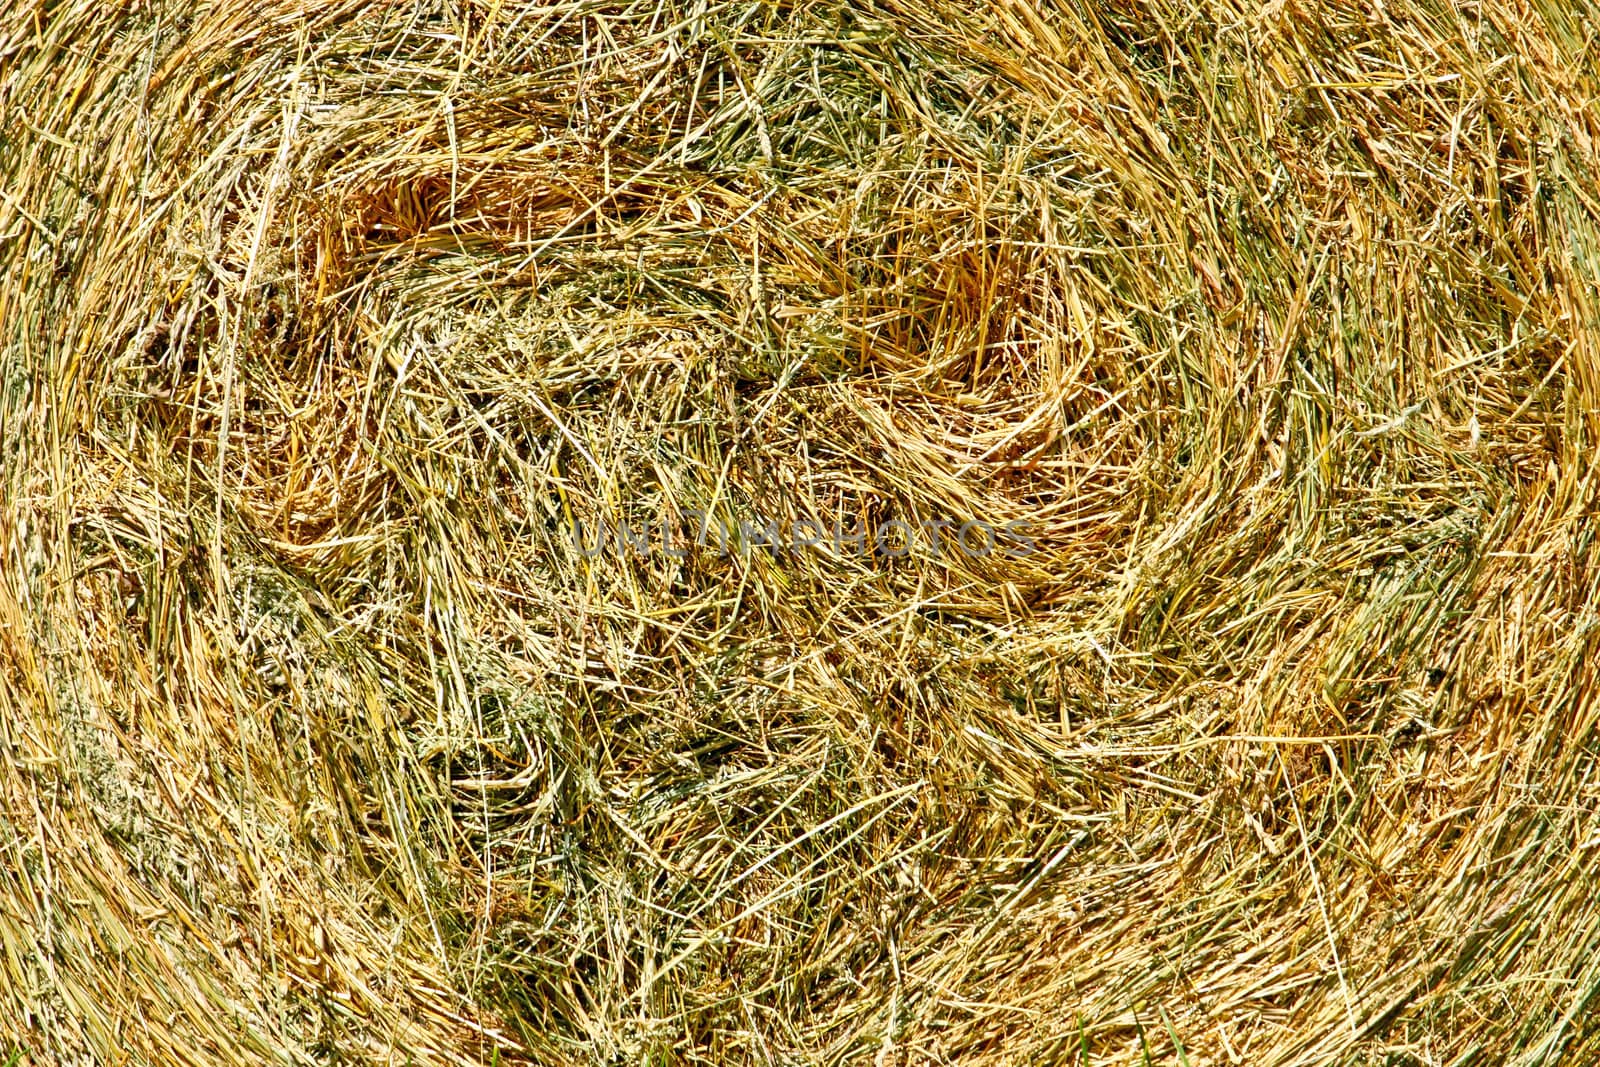 Hay bale from freshly cut grass, close up